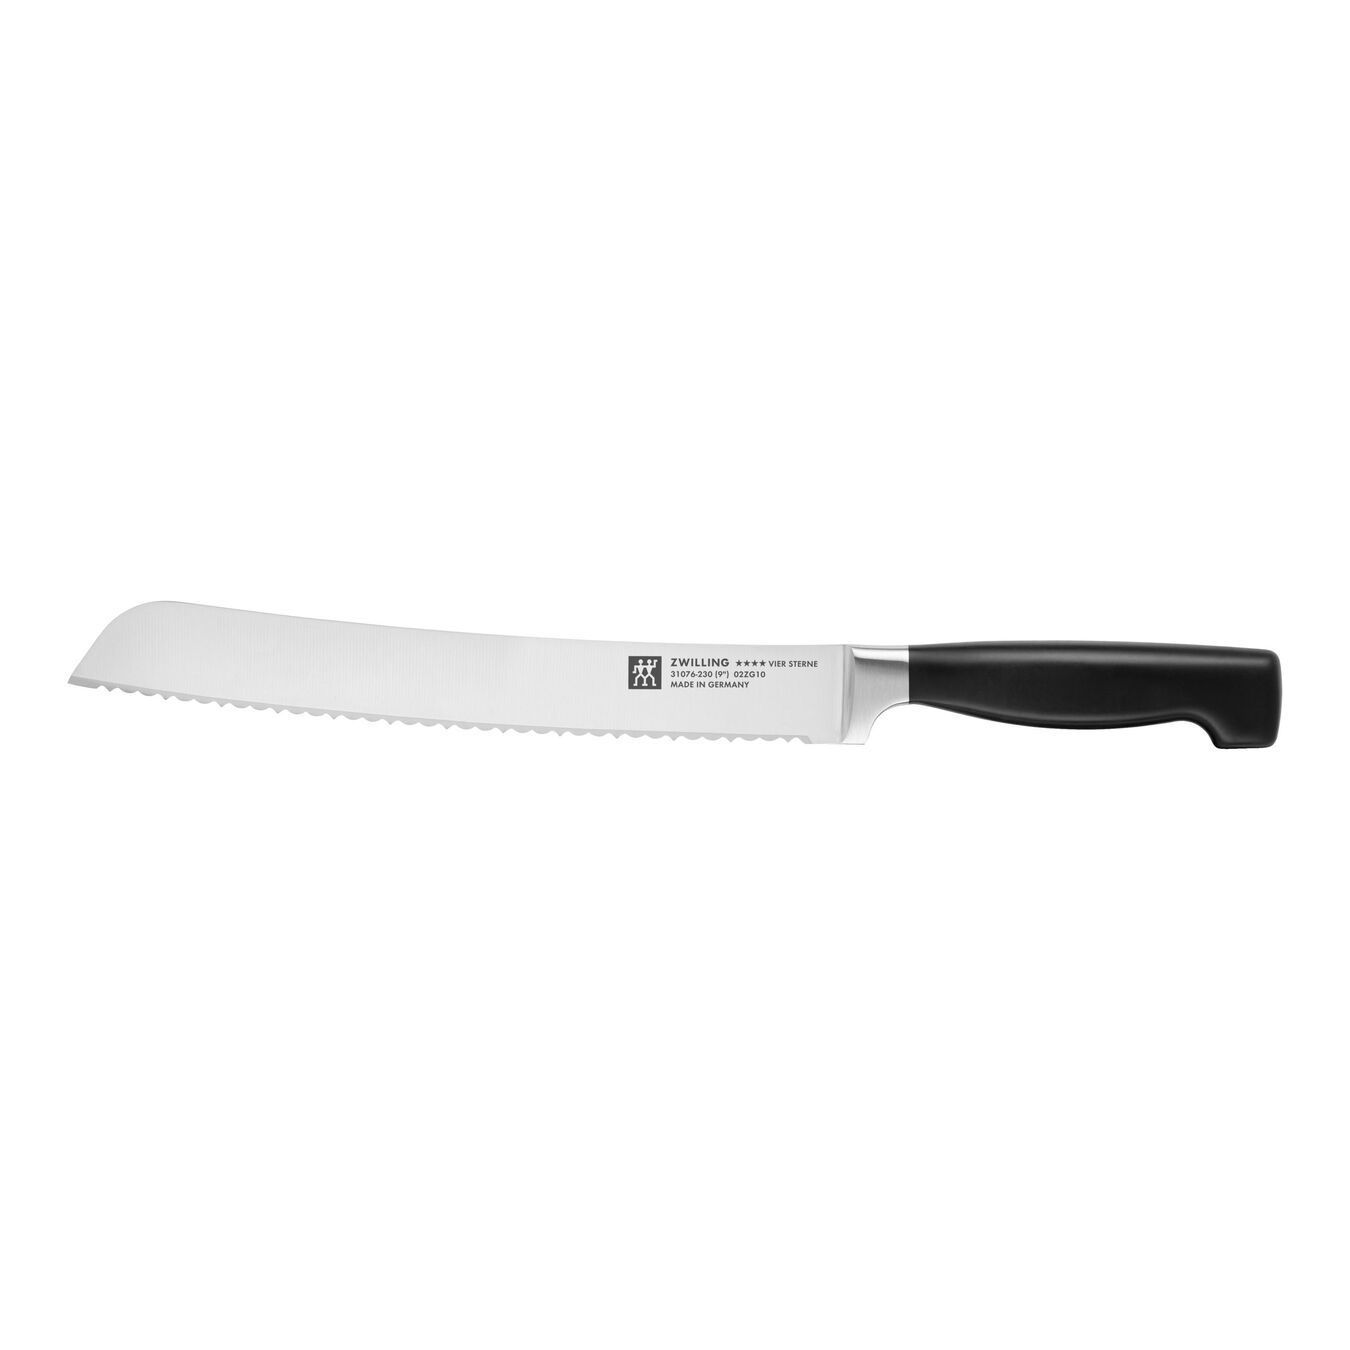 9-inch, Country Bread Knife,,large 1